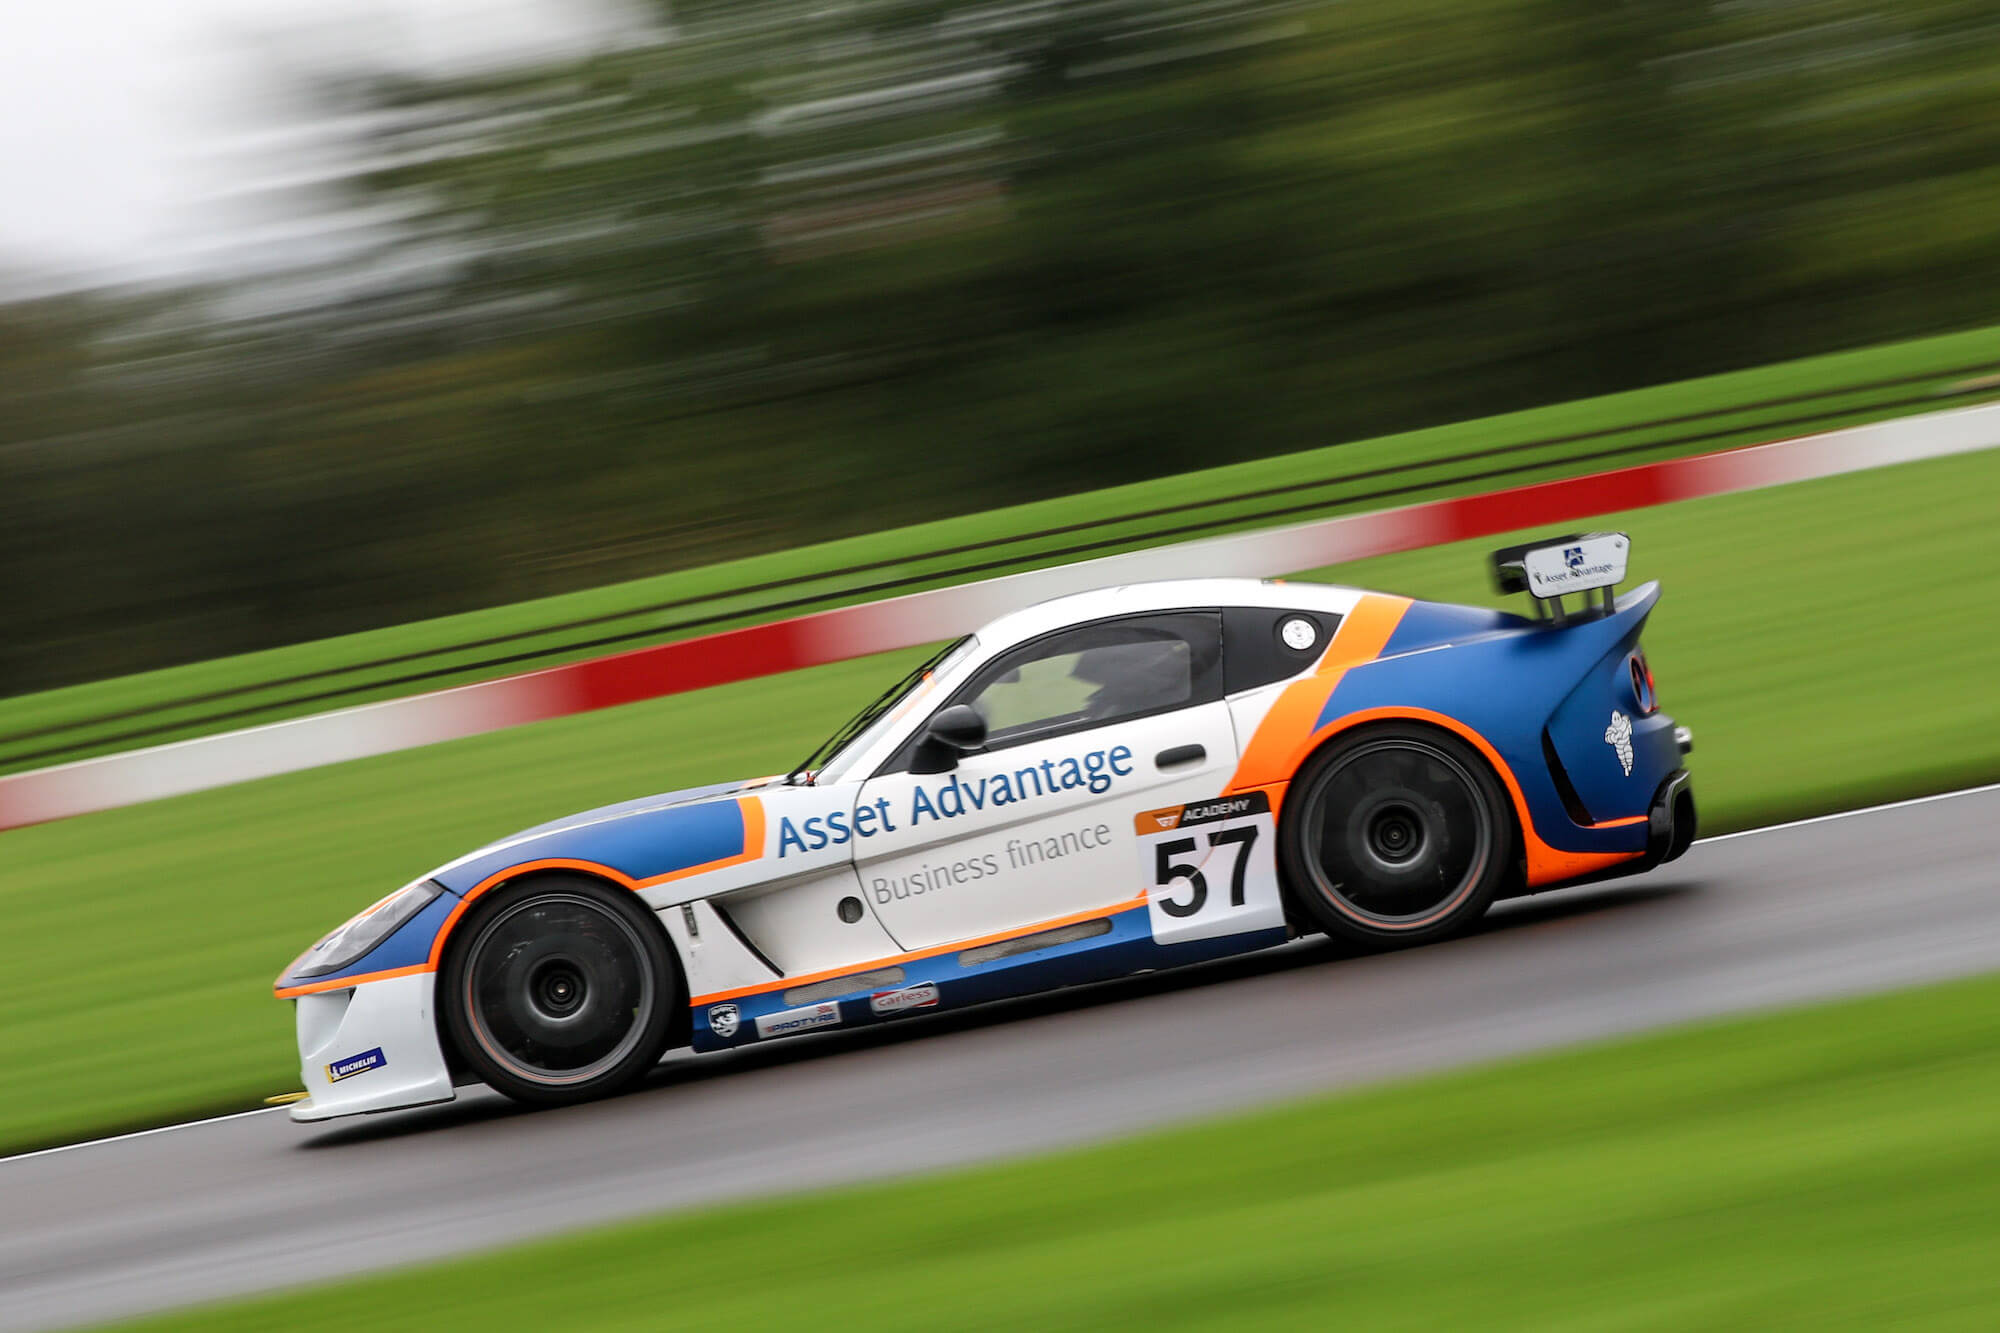 Featured Image for “Asset Advantage Celebrate As Nick White Wins Ginetta GT Academy Title”